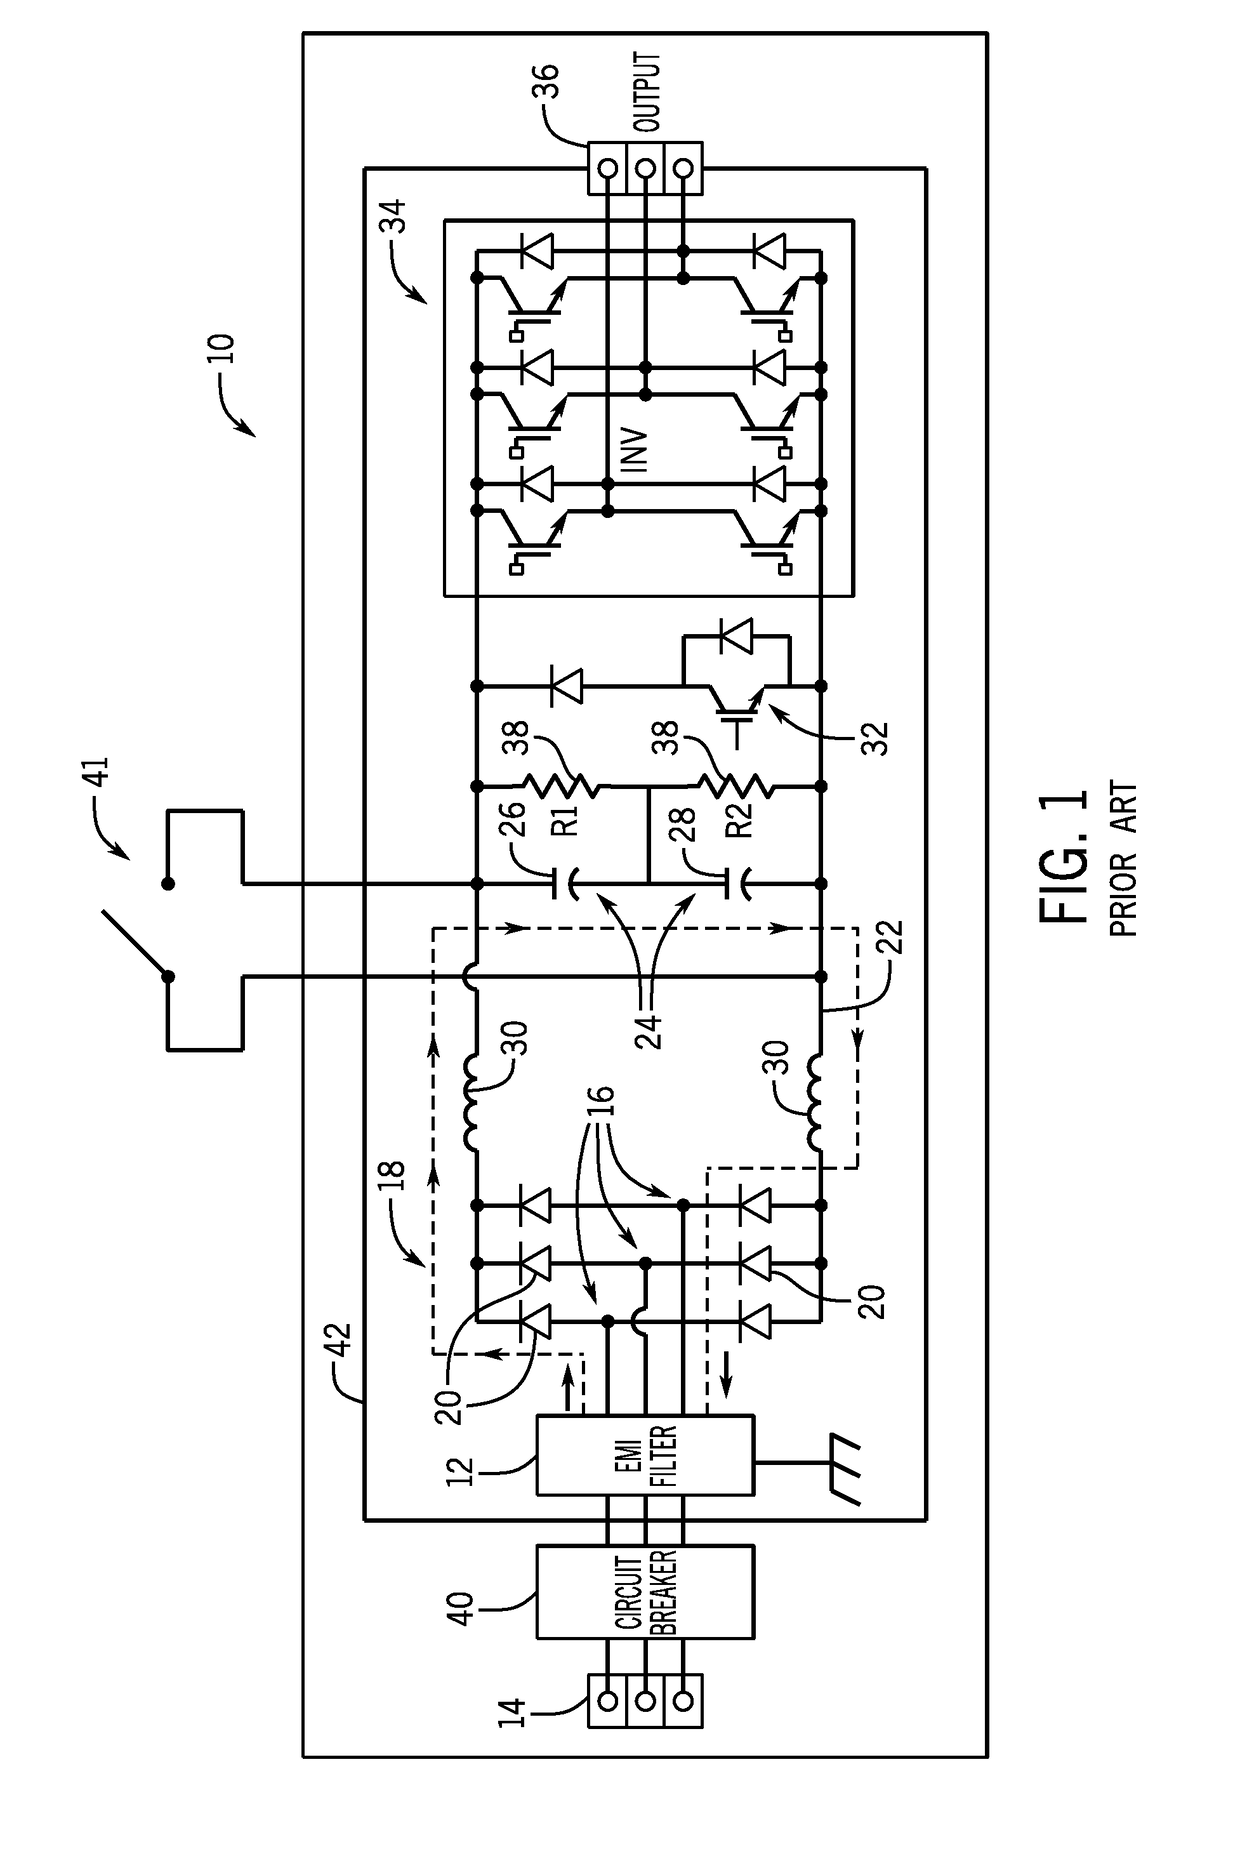 Adjustable speed drive with integrated solid-state circuit breaker and method of operation thereof